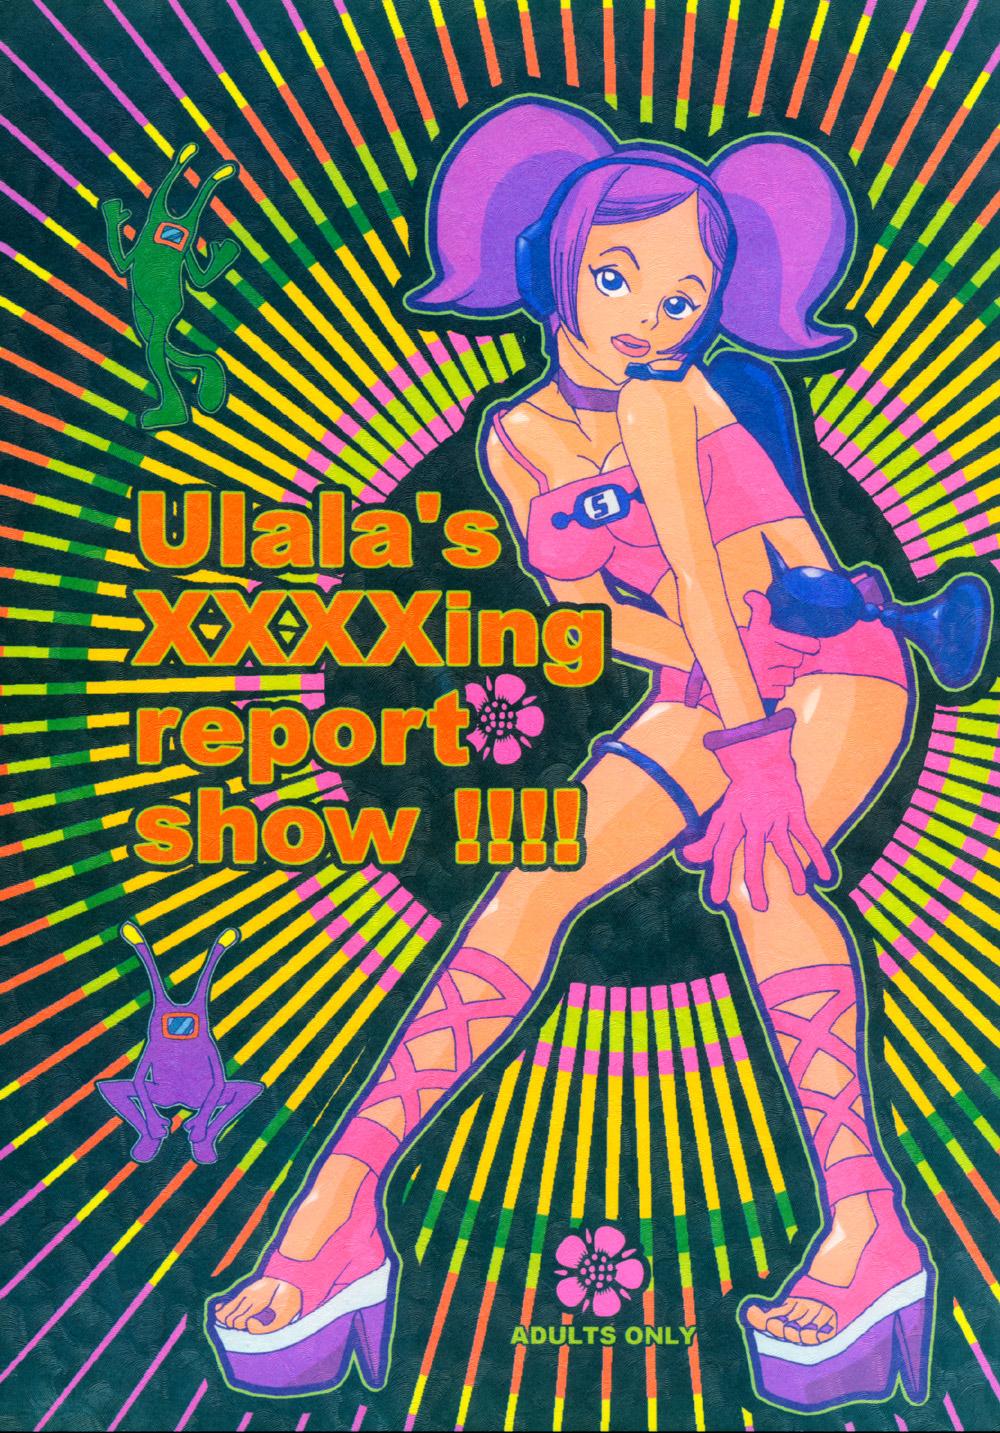 Latinos Ulala's XXXXing Report Show!!!! - Space channel 5 Hardcore Free Porn - Picture 1